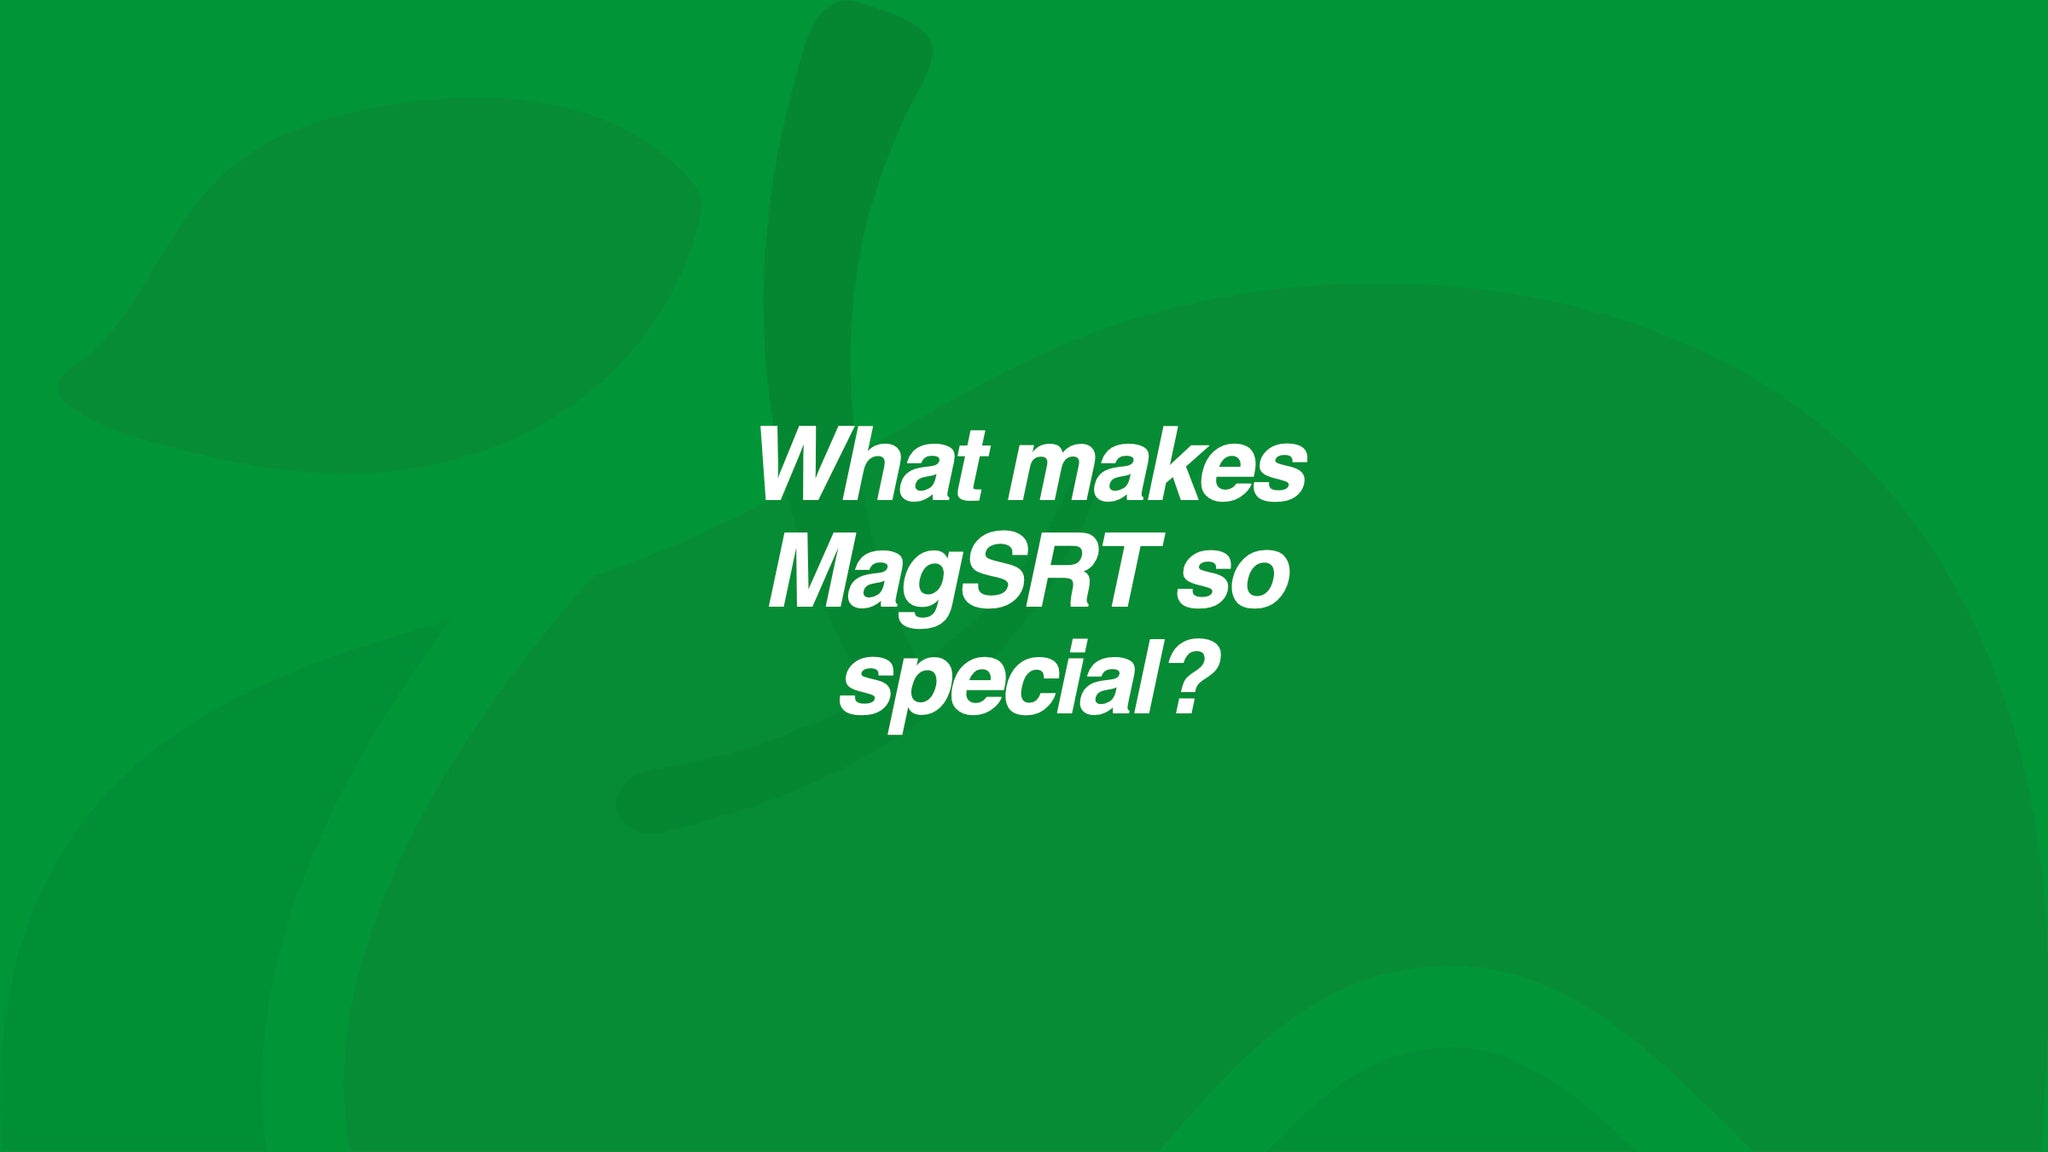 What makes Magnesium w/SRT® so special?